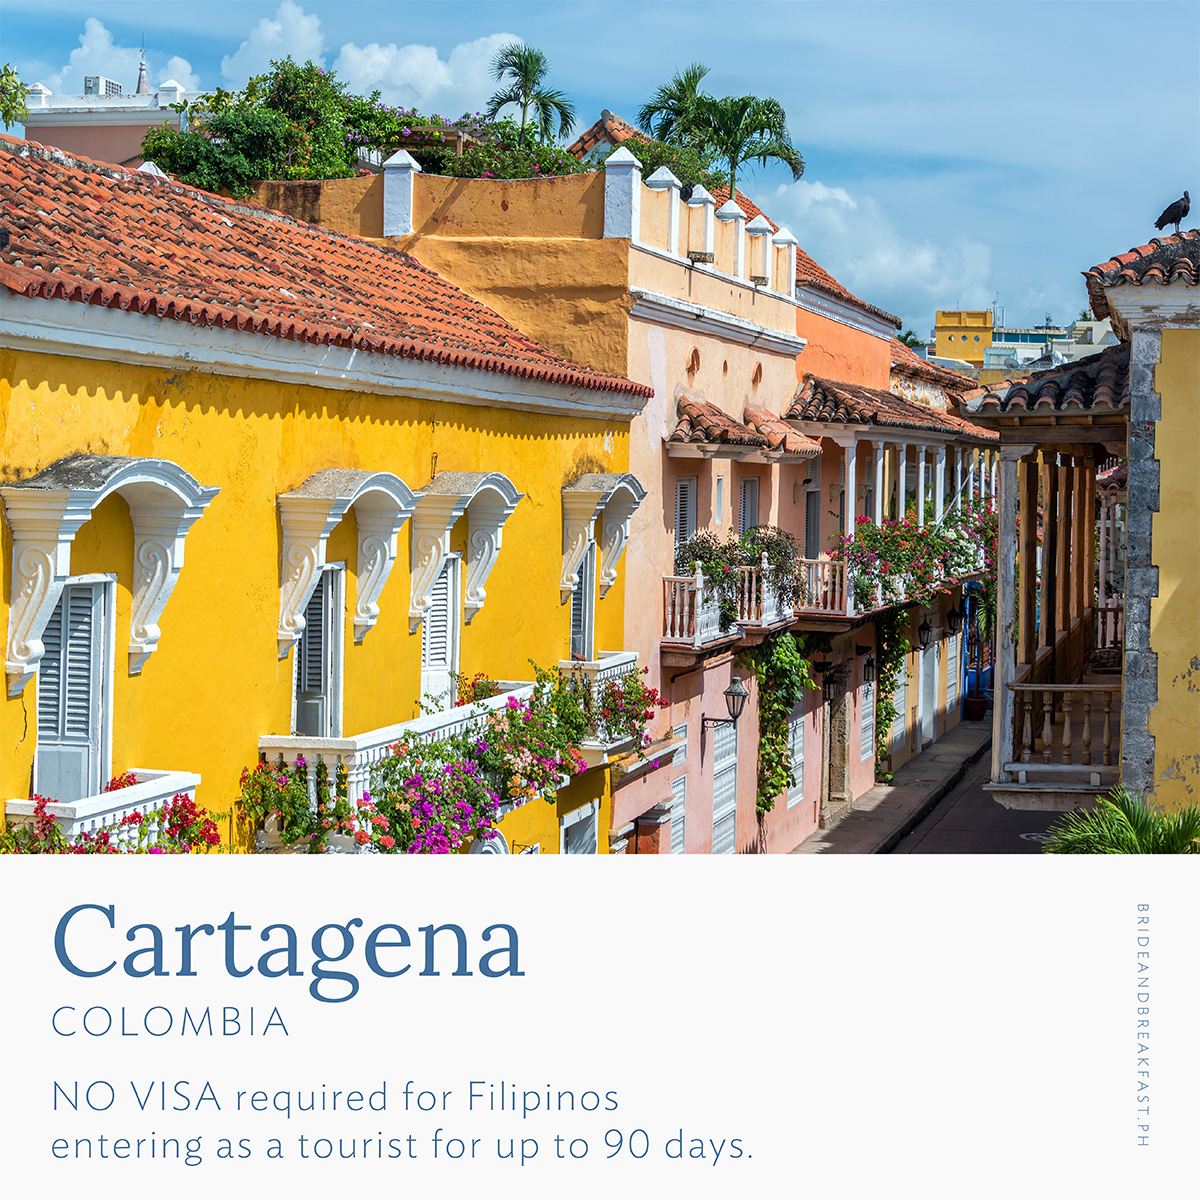 CARTAGENA, COLOMBIA Visa Requirement: NO VISA required for Filipinos entering as a tourist for up to 90 days.